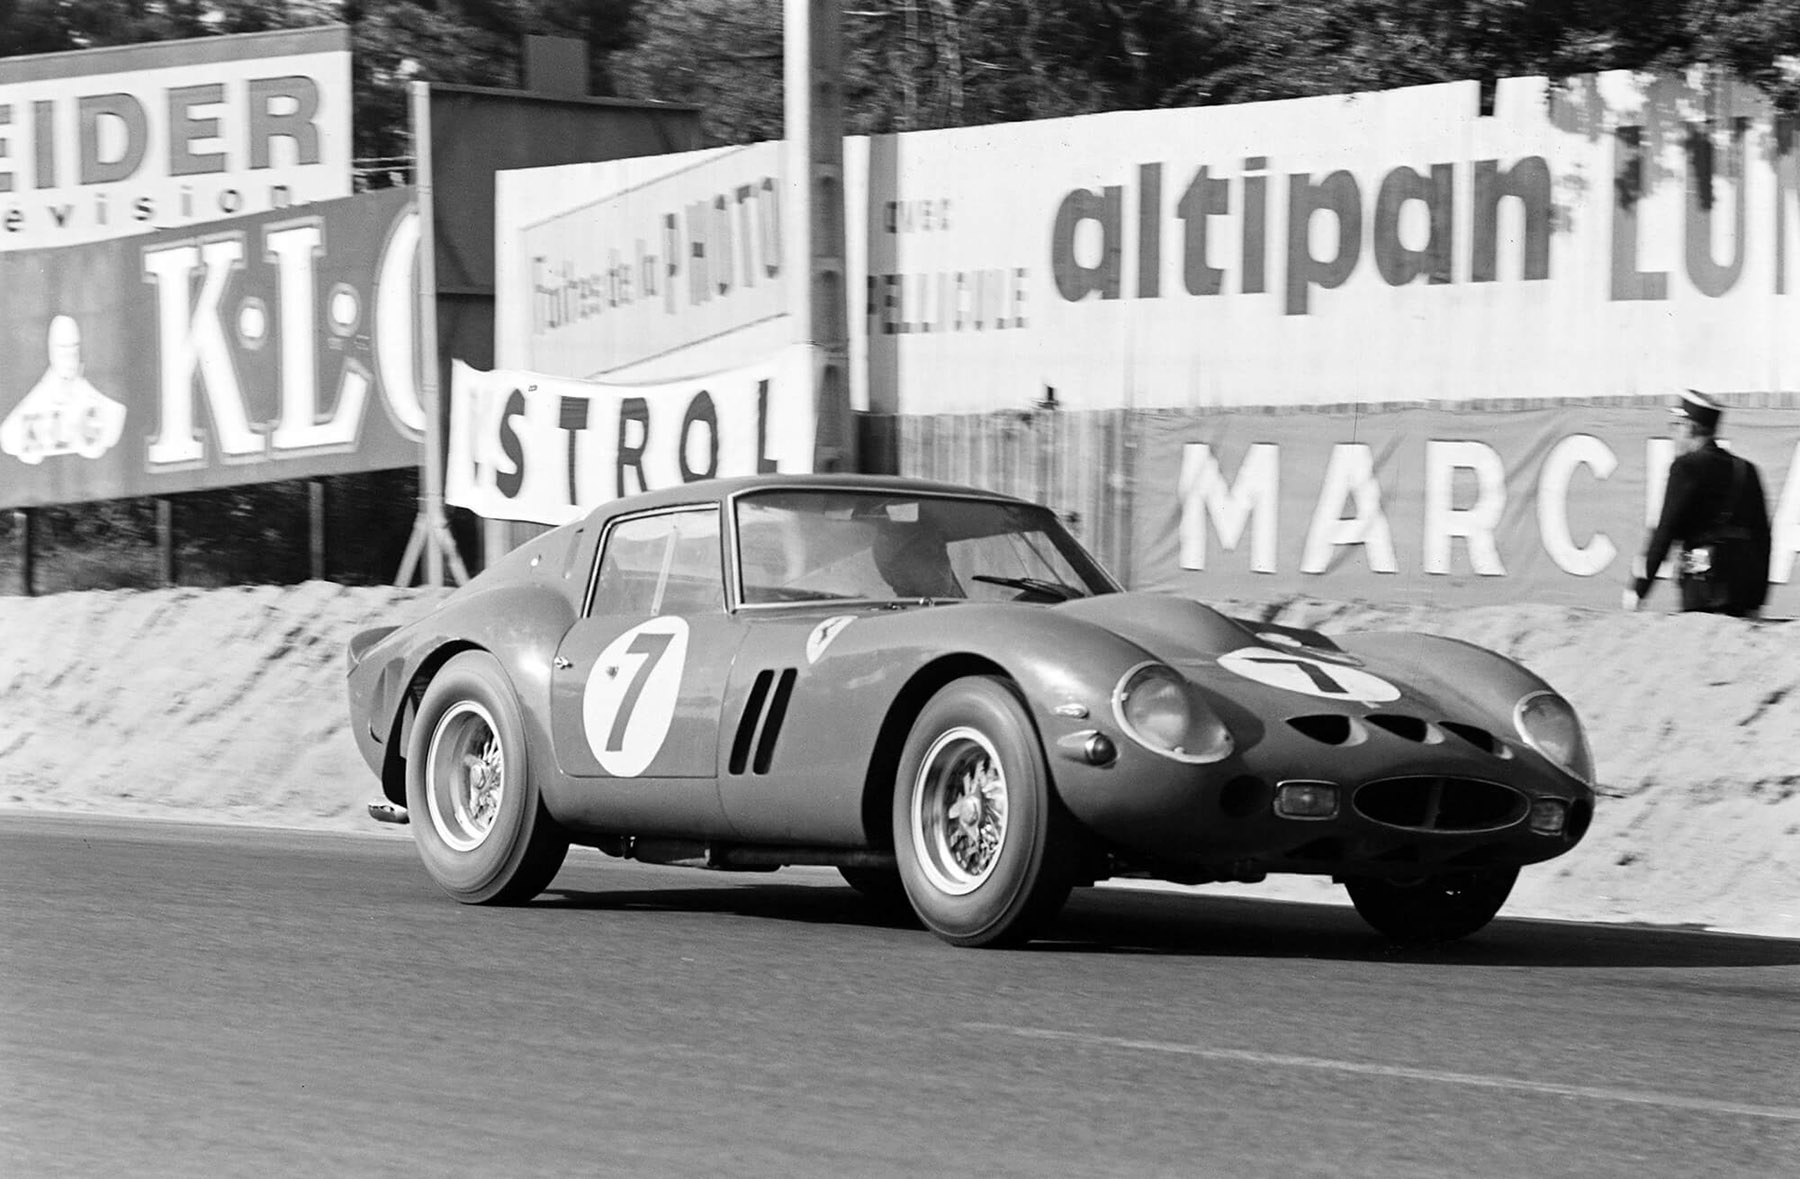 Chassis no. 3765, race #7, driven by Mike Parkes and Lorenzo Bandini during the 24 Hours of Le Mans at Circuit de la Sarthe on 24 June 1962.